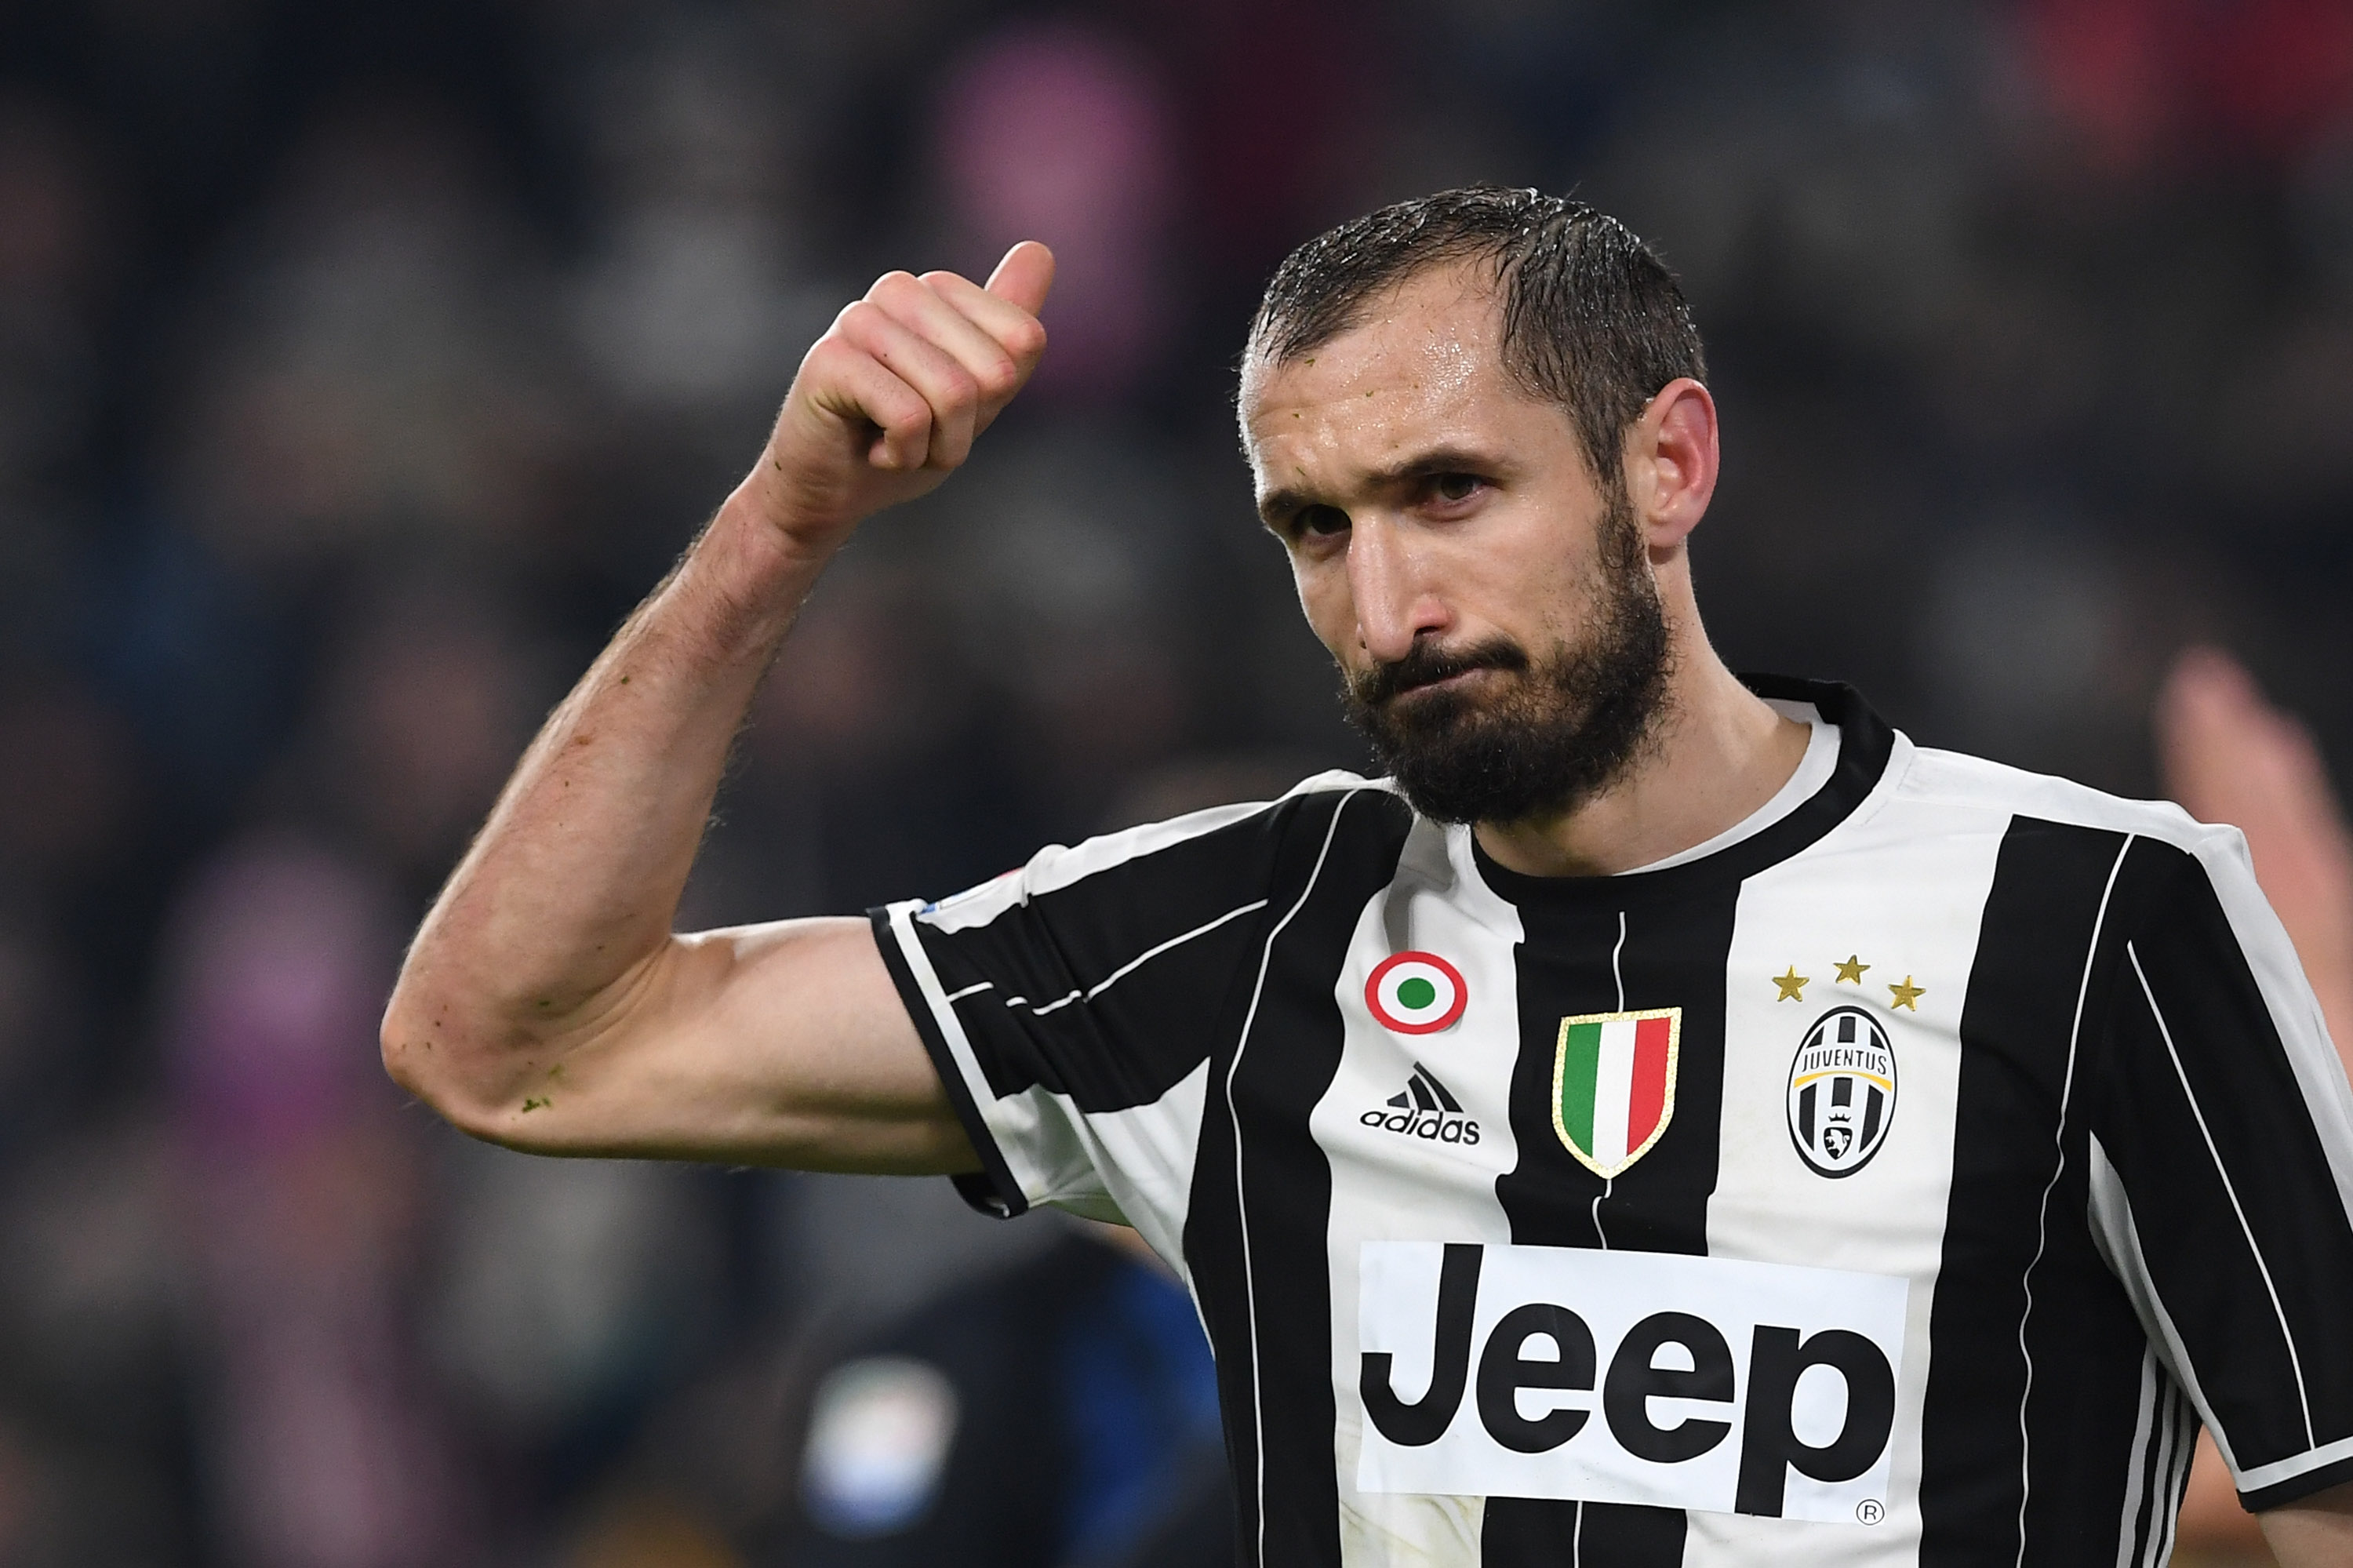 TURIN, ITALY - FEBRUARY 05:  Giorgio Chiellini of Juventus FC gestures during the Serie A match between Juventus FC and FC Internazionale at Juventus Stadium on February 5, 2017 in Turin, Italy.  (Photo by Valerio Pennicino/Getty Images)